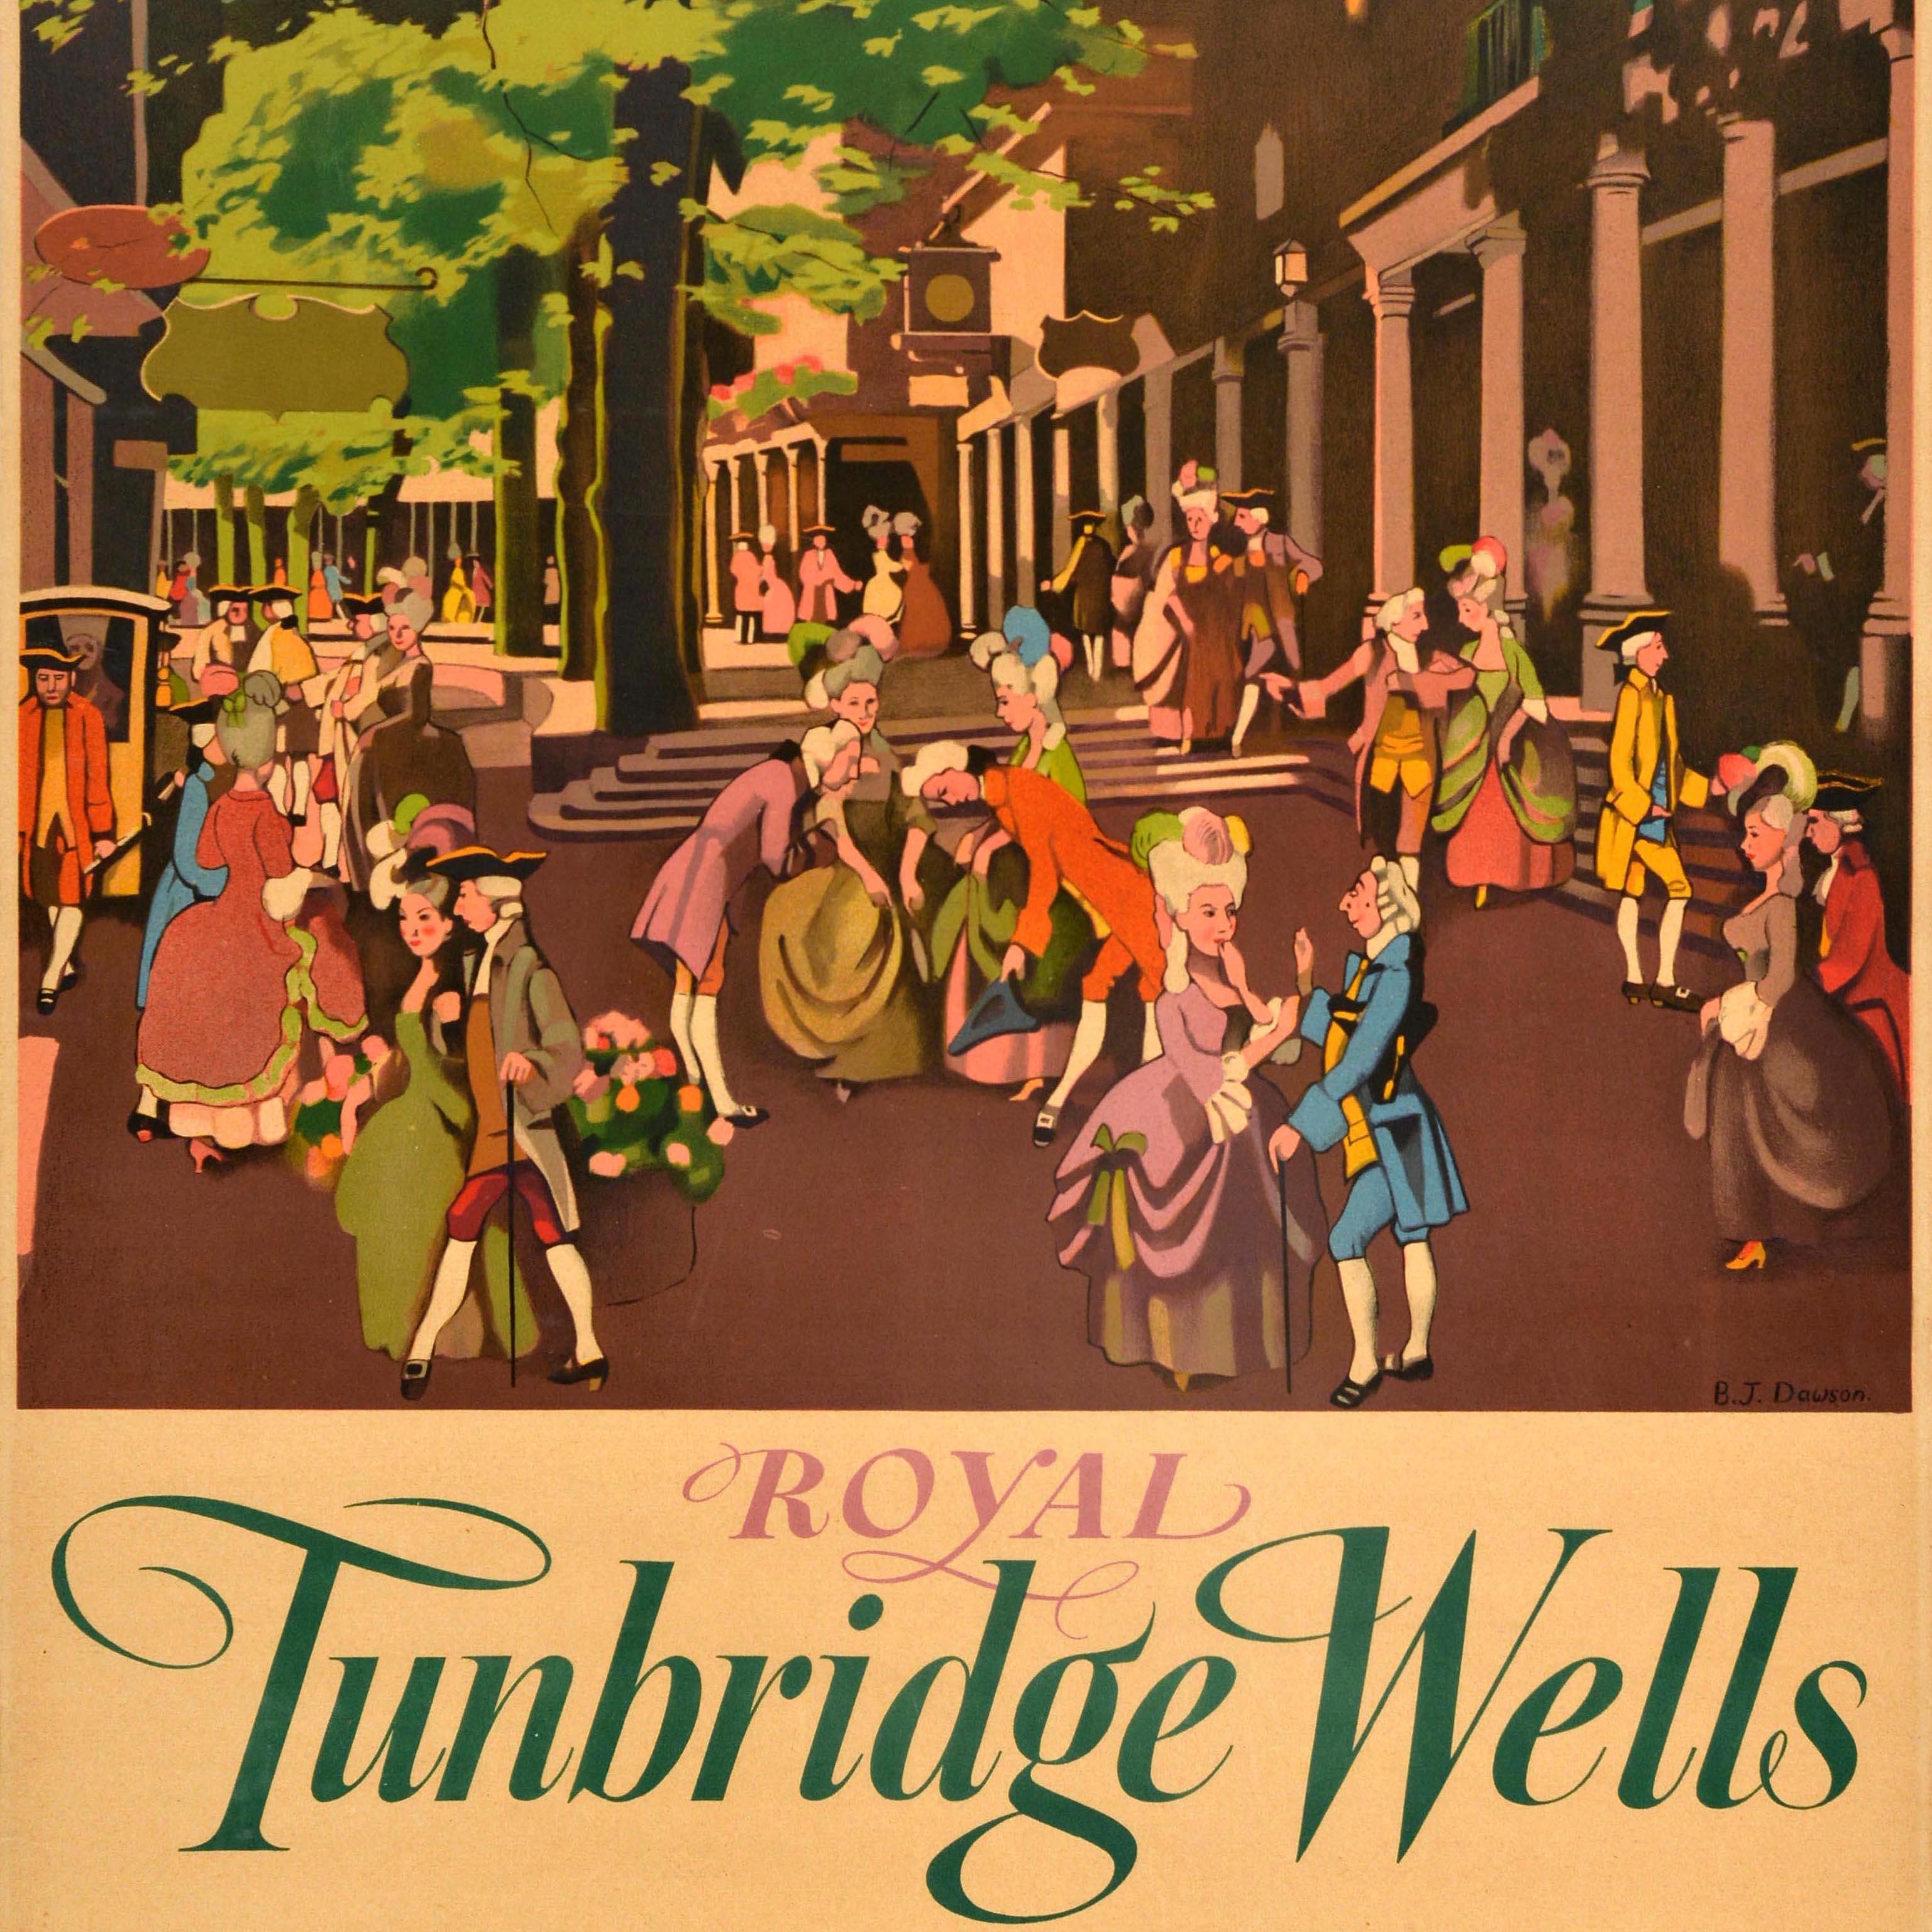 Original vintage British Railways train travel poster for Royal Tunbridge Wells featuring an illustration of elegantly dressed ladies and gentlemen in fashionable 18th century Regency style dresses, suits, wigs and hats under green trees with a